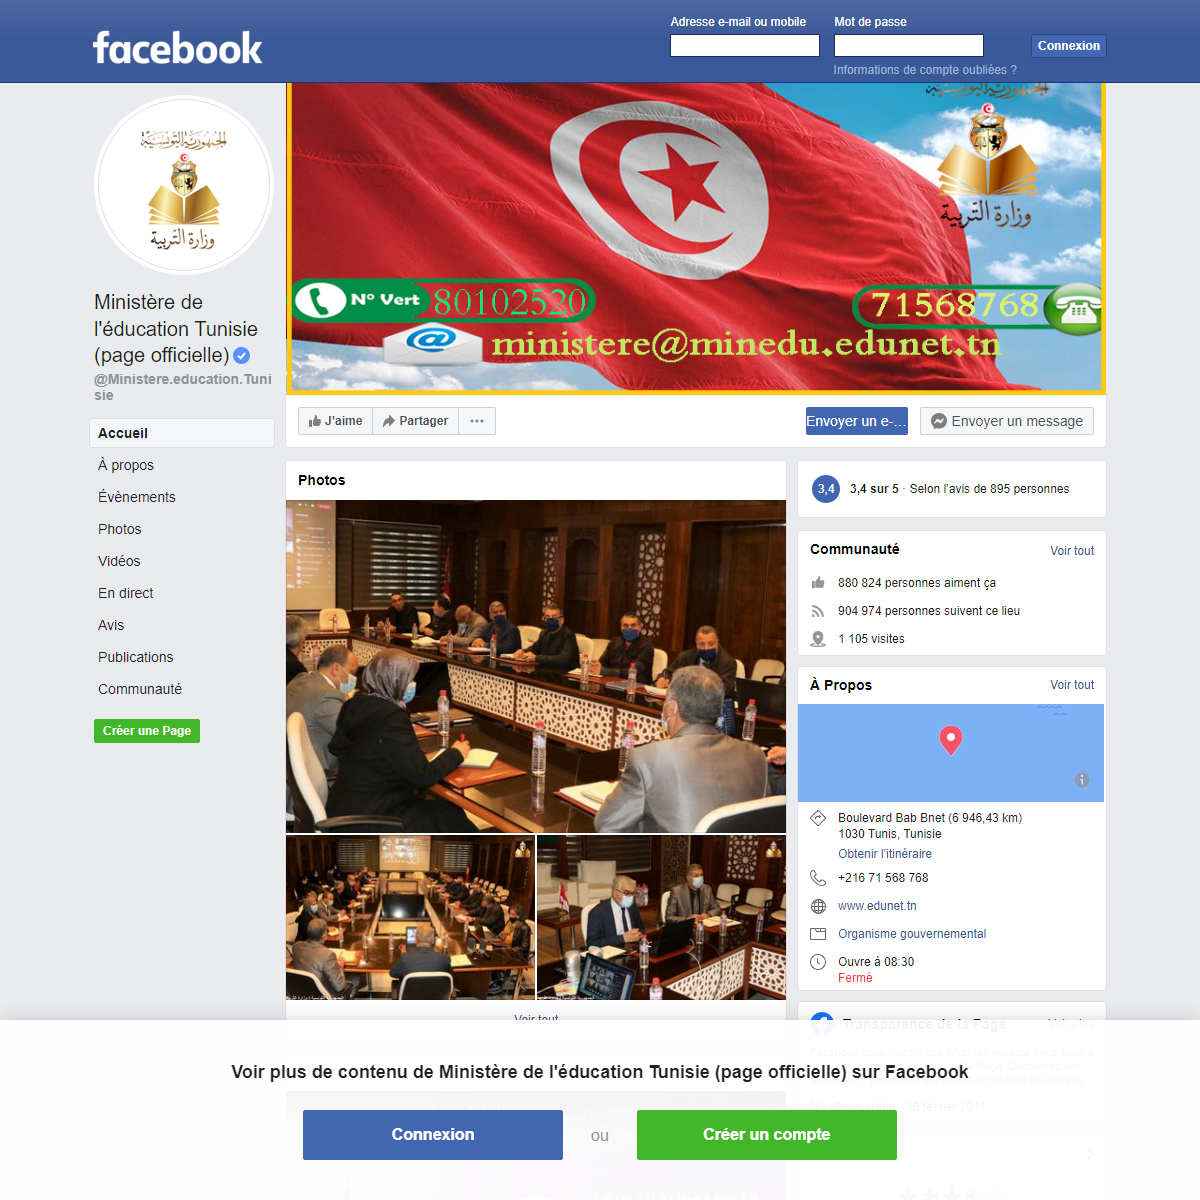 A complete backup of https://fr-fr.facebook.com/Ministere.education.Tunisie/